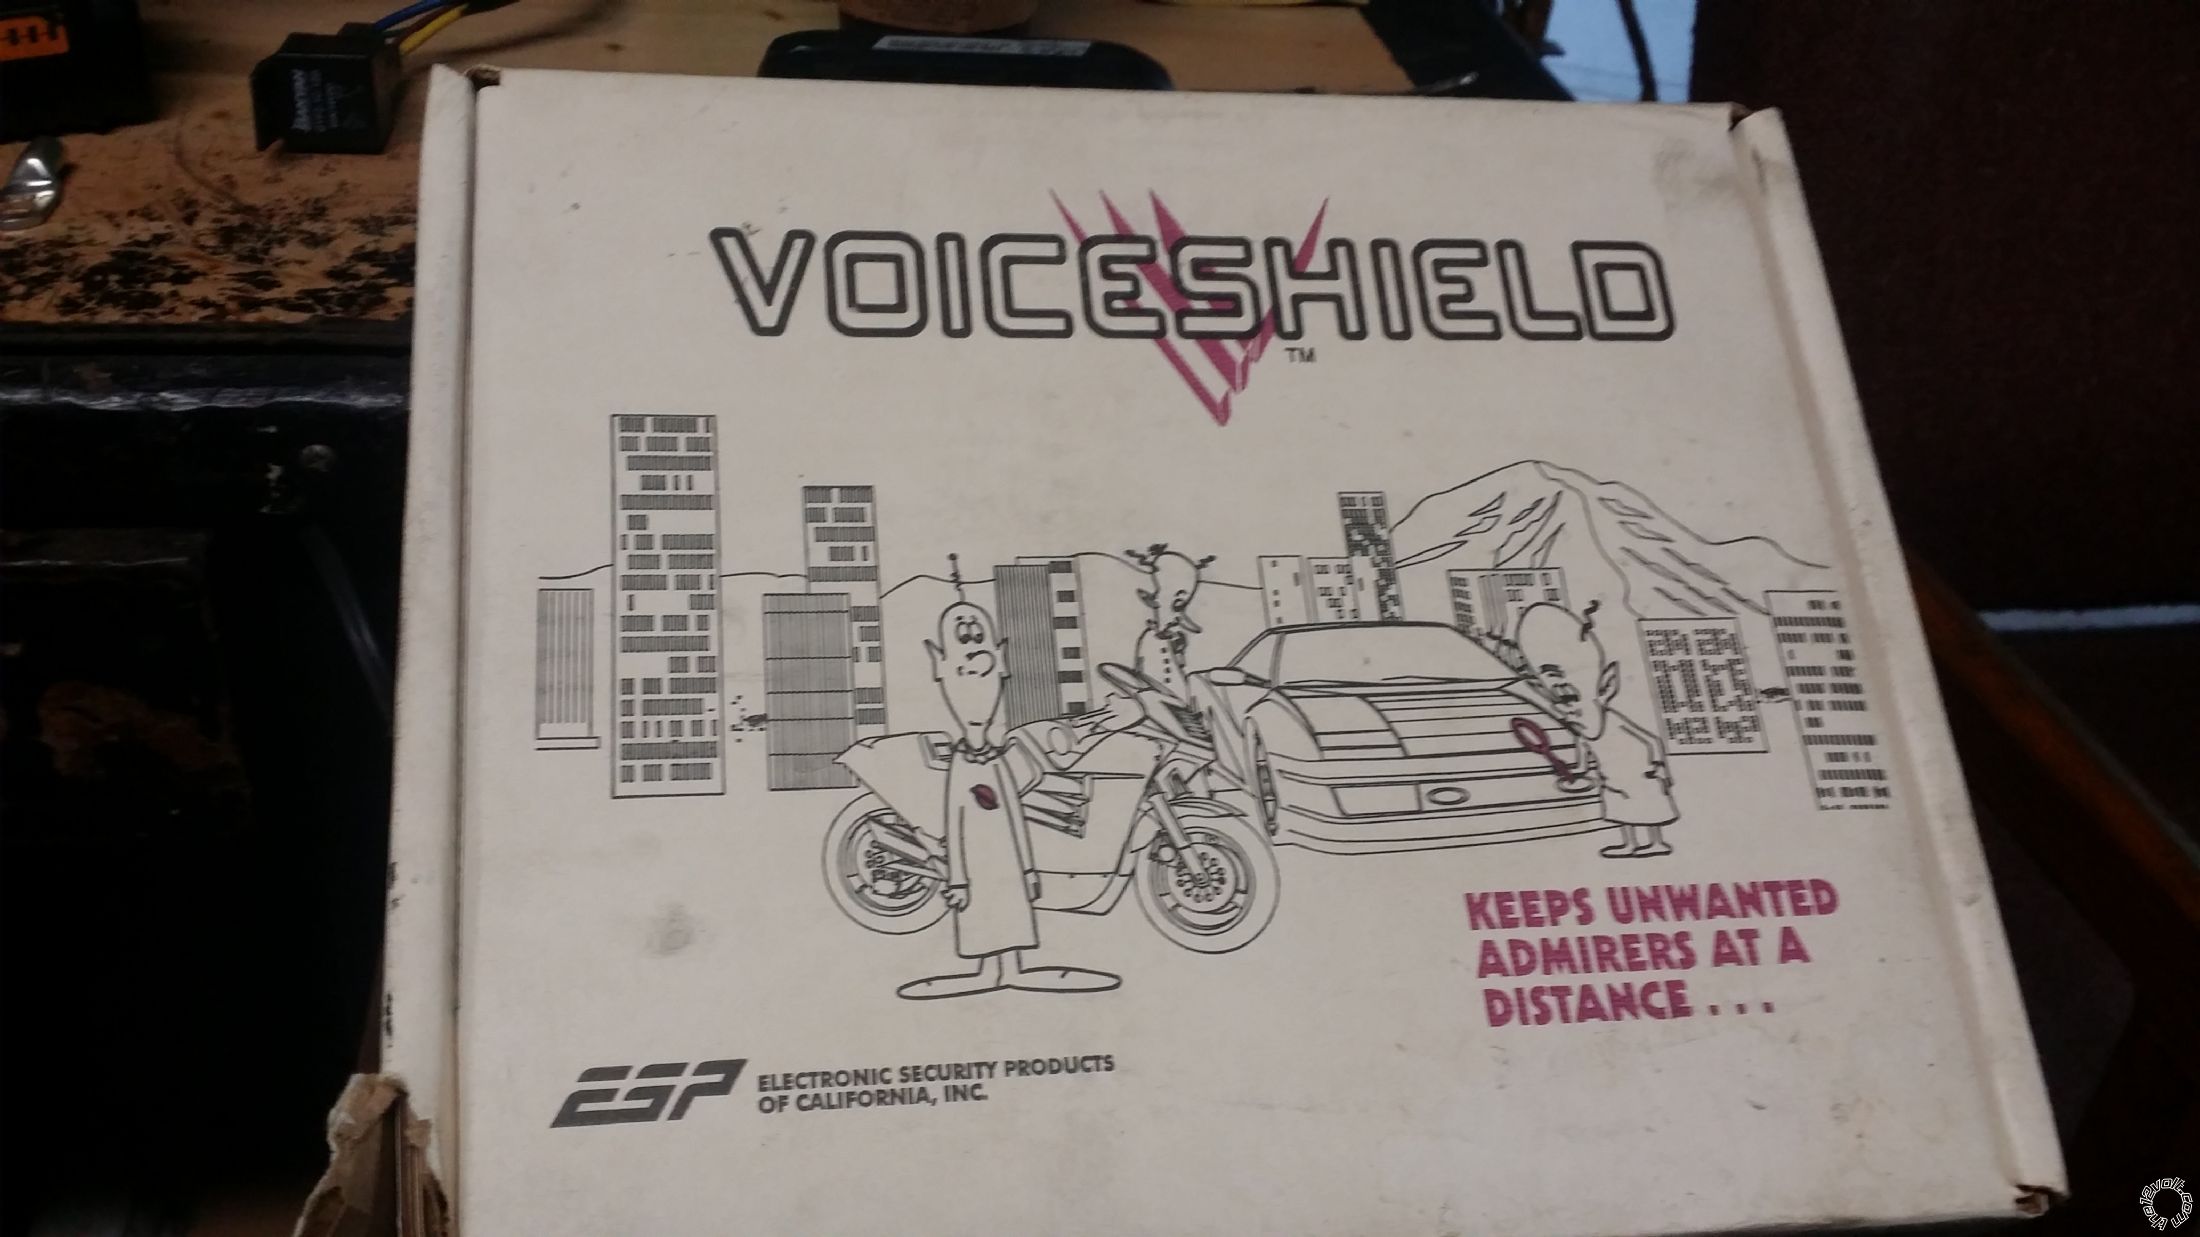 Voiceshield Wiring Diagram Needed -- posted image.